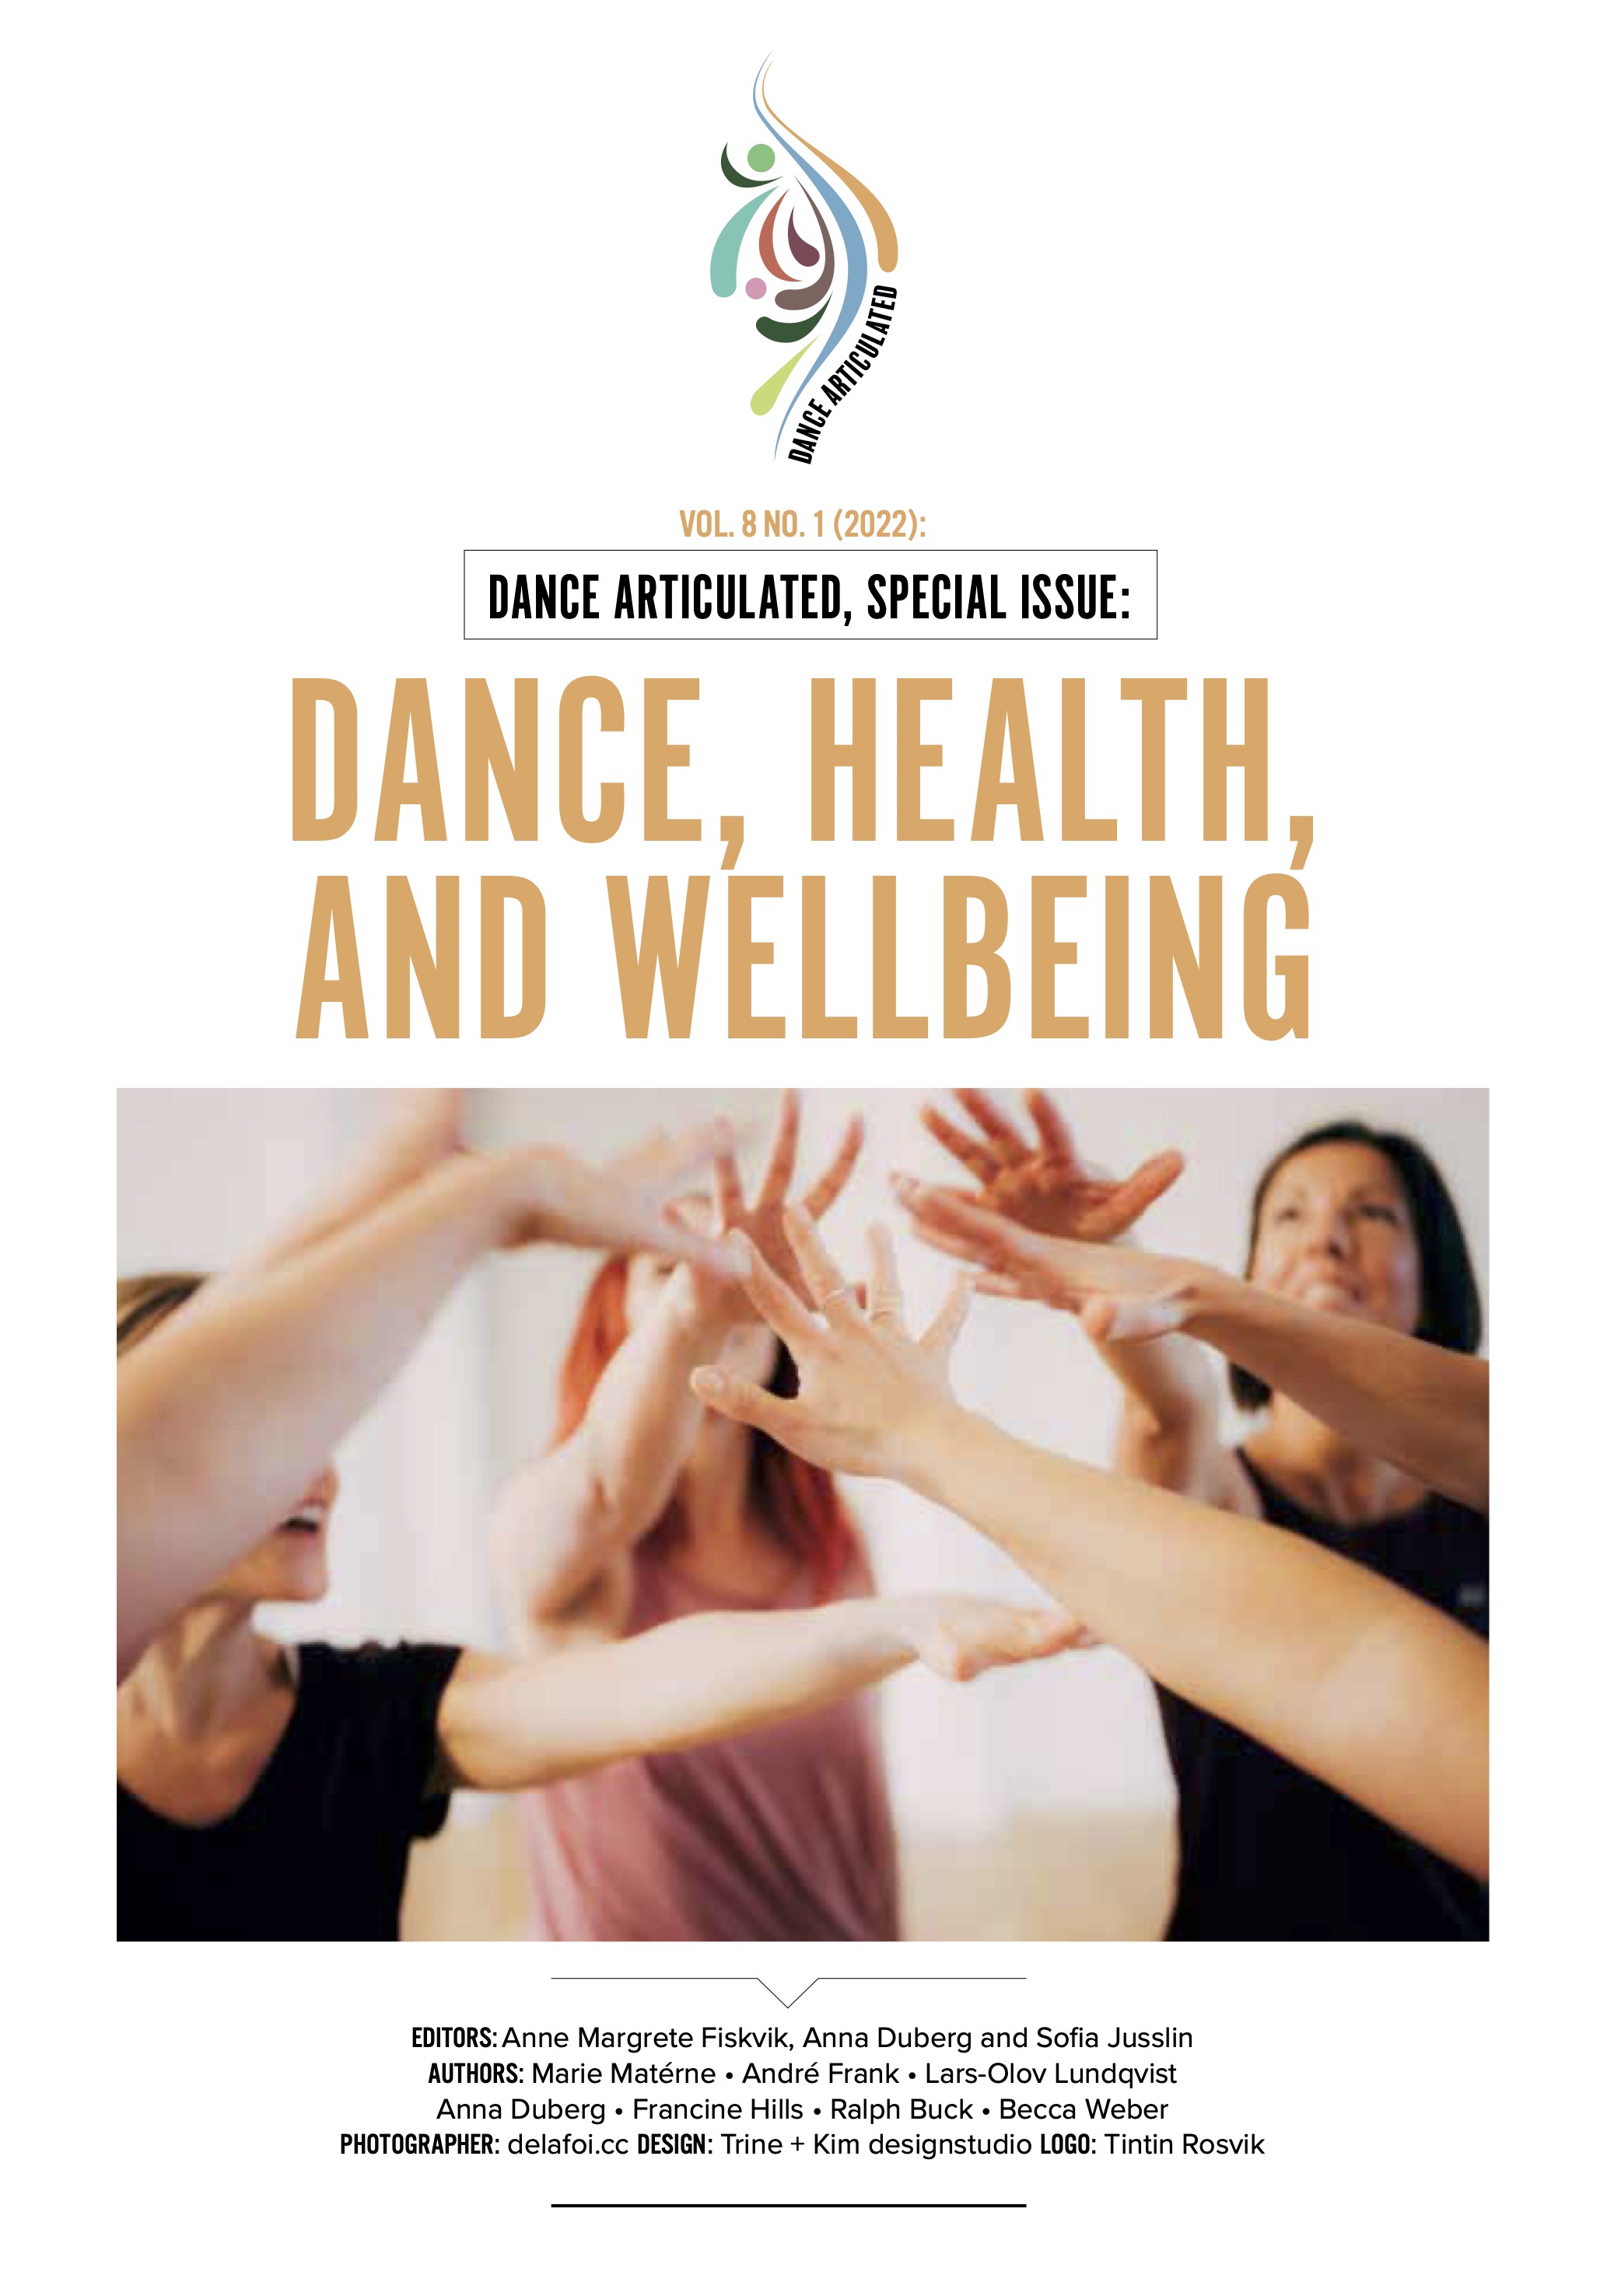 					View Vol. 8 No. 1 (2022): Special issue: DANCE, HEALTH, AND WELLBEING
				